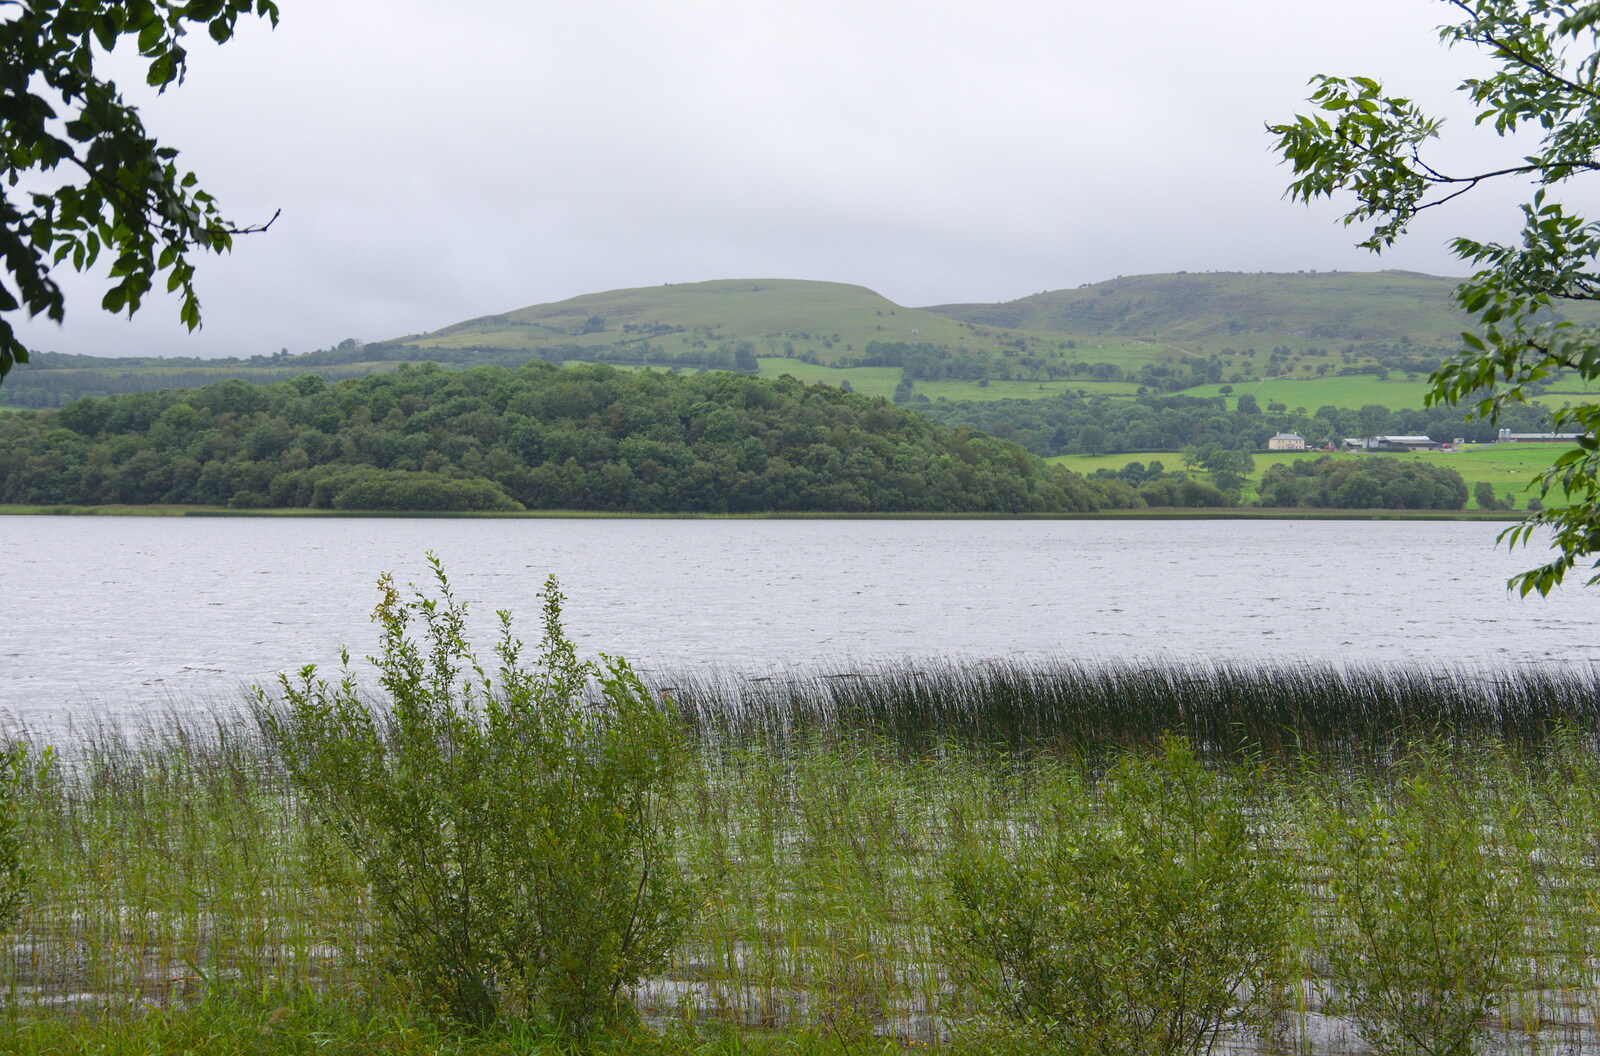 Lough Macnean Lower from Travels in the Borderlands: An Blaic/Blacklion to Belcoo and back, Cavan and Fermanagh, Ireland - 22nd August 2019